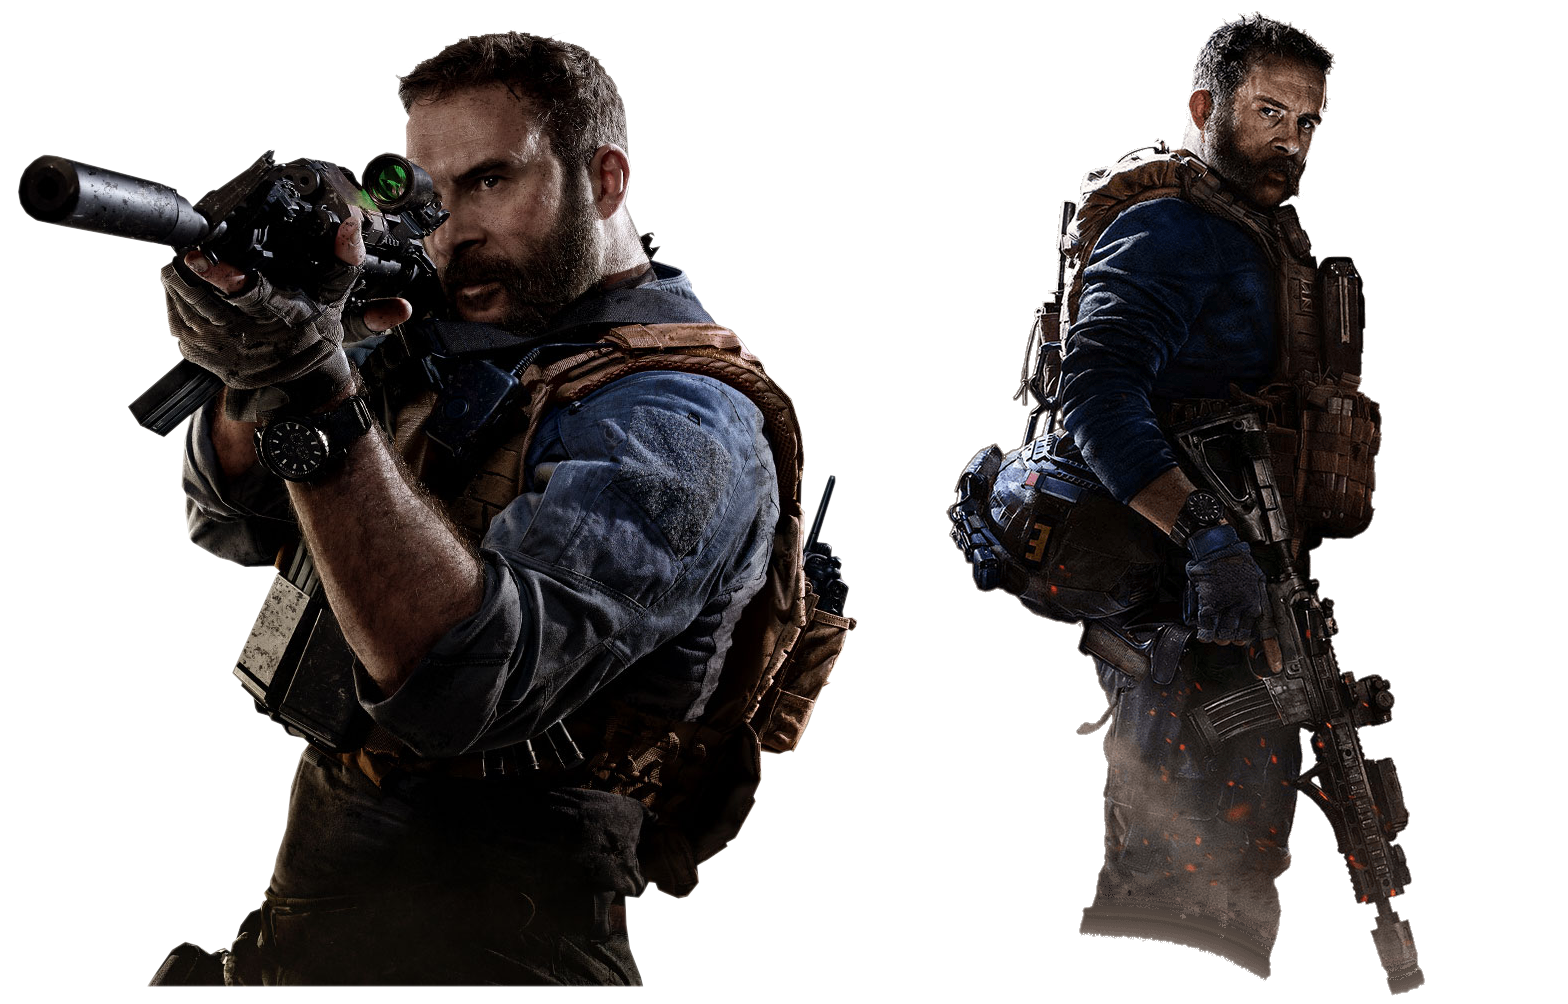 Call of Duty Modern Warfare Soldier Images Transparentes